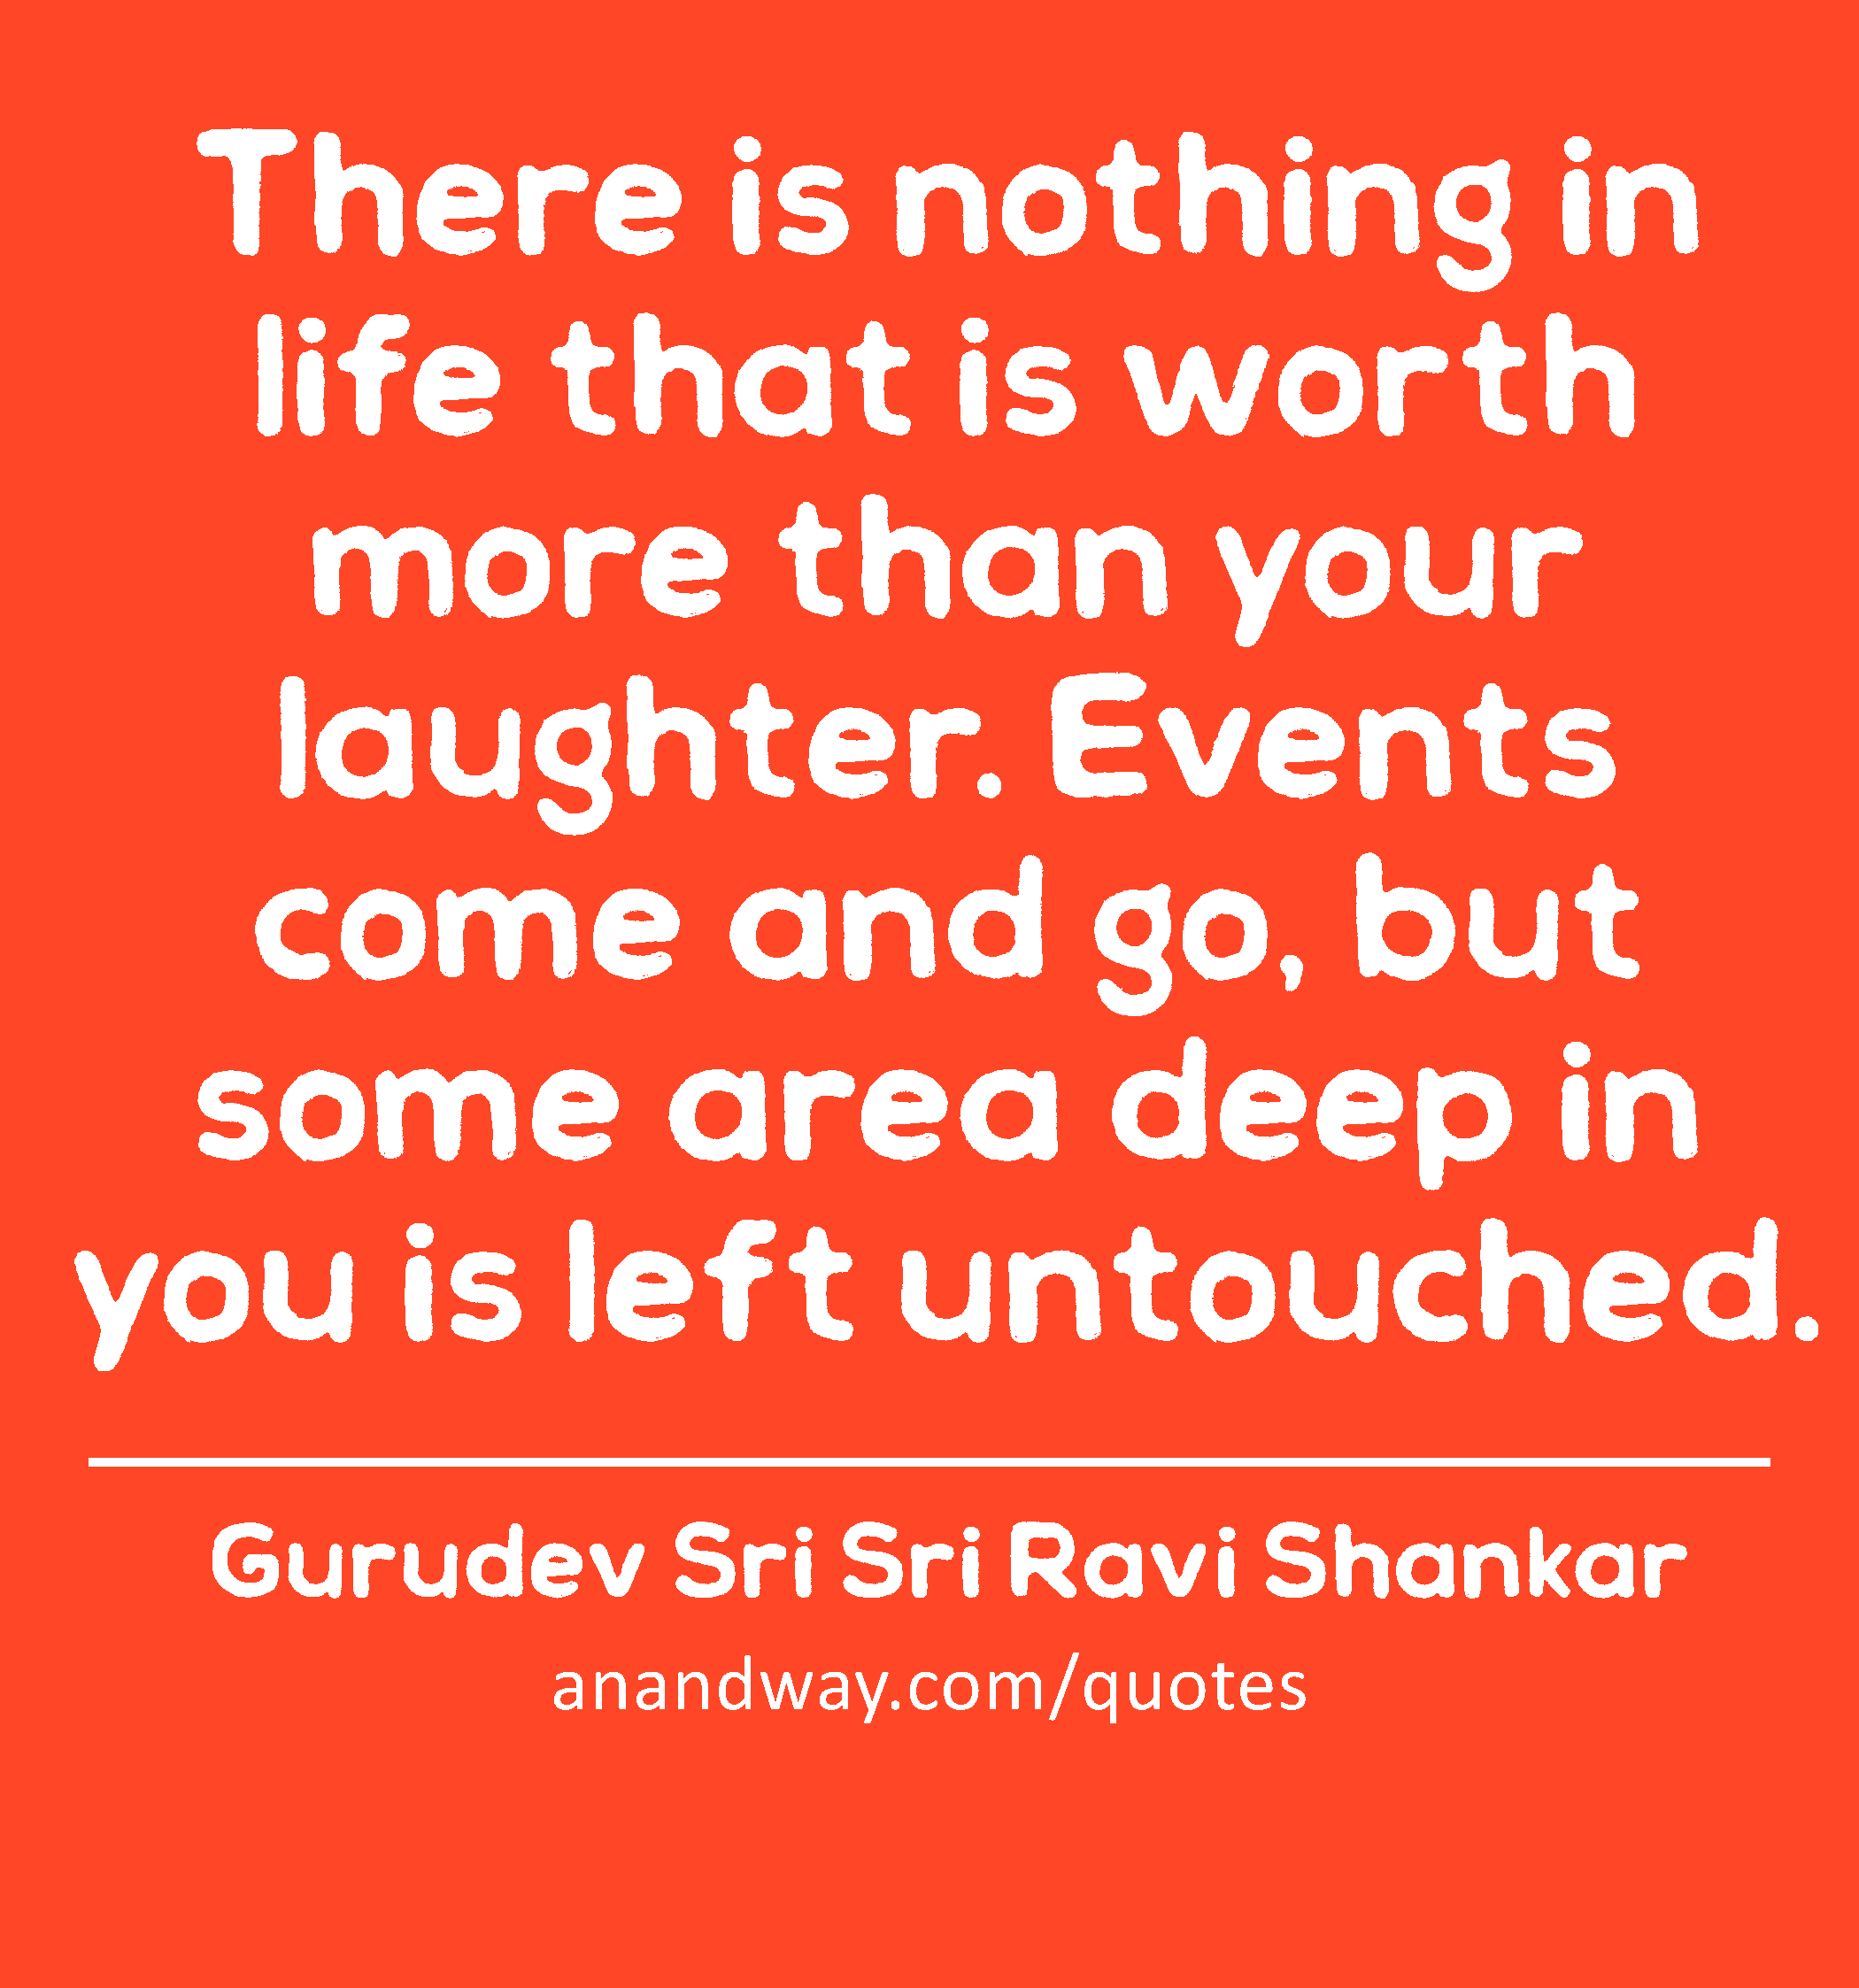 There is nothing in life that is worth more than your laughter. Events come and go, but some area
 -Gurudev Sri Sri Ravi Shankar